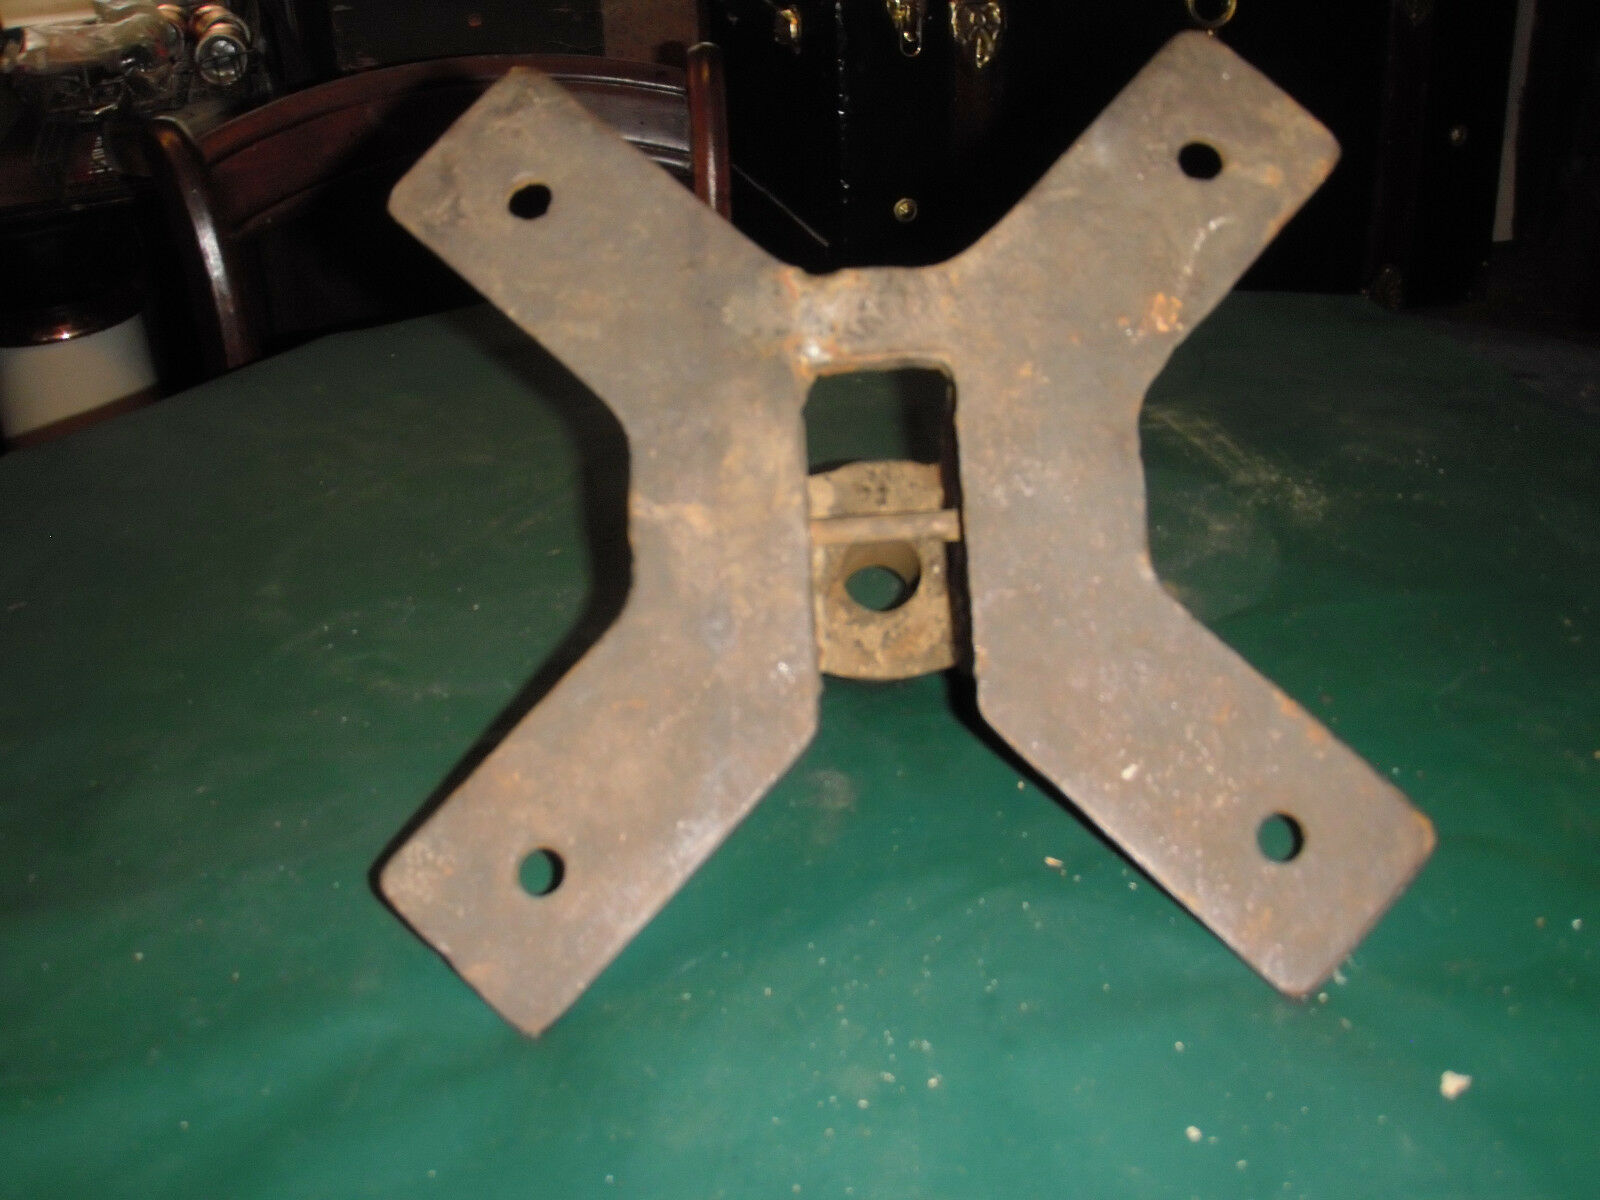 Antique Kochs Wood Barber Chair Part-chair Bracket For The Piston -in Good Shape